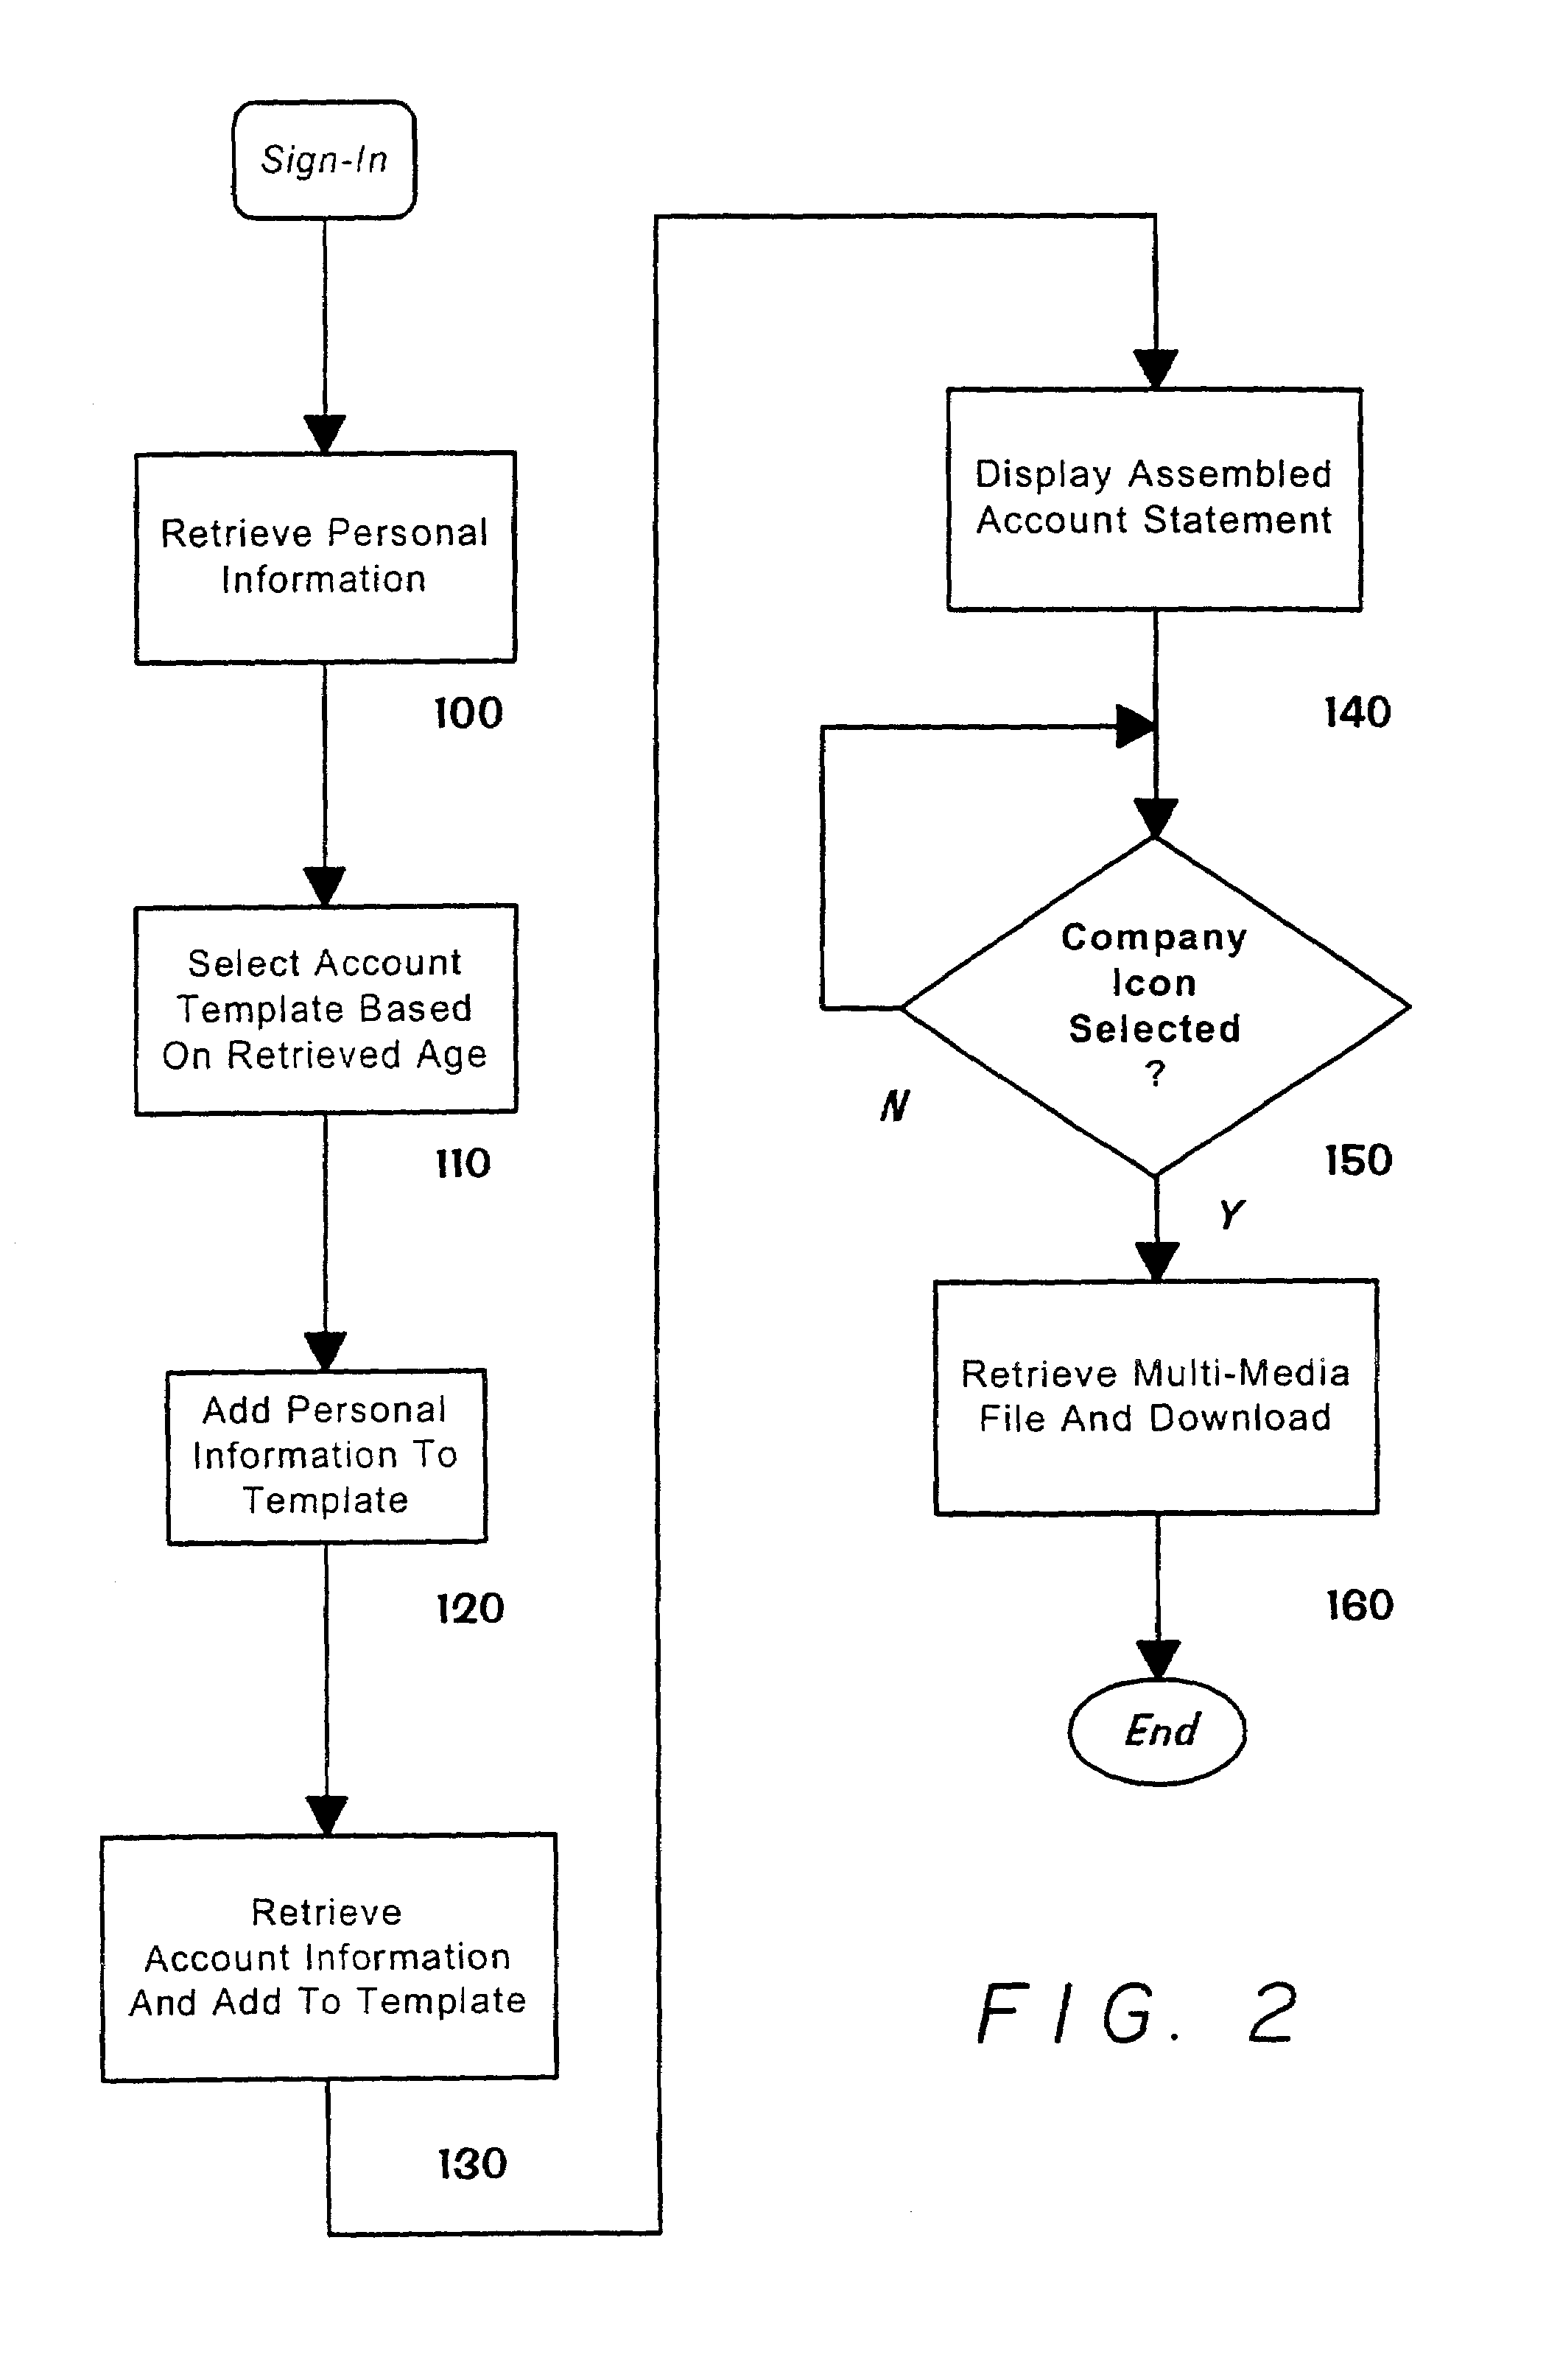 System and method for providing financial services to children and teenagers